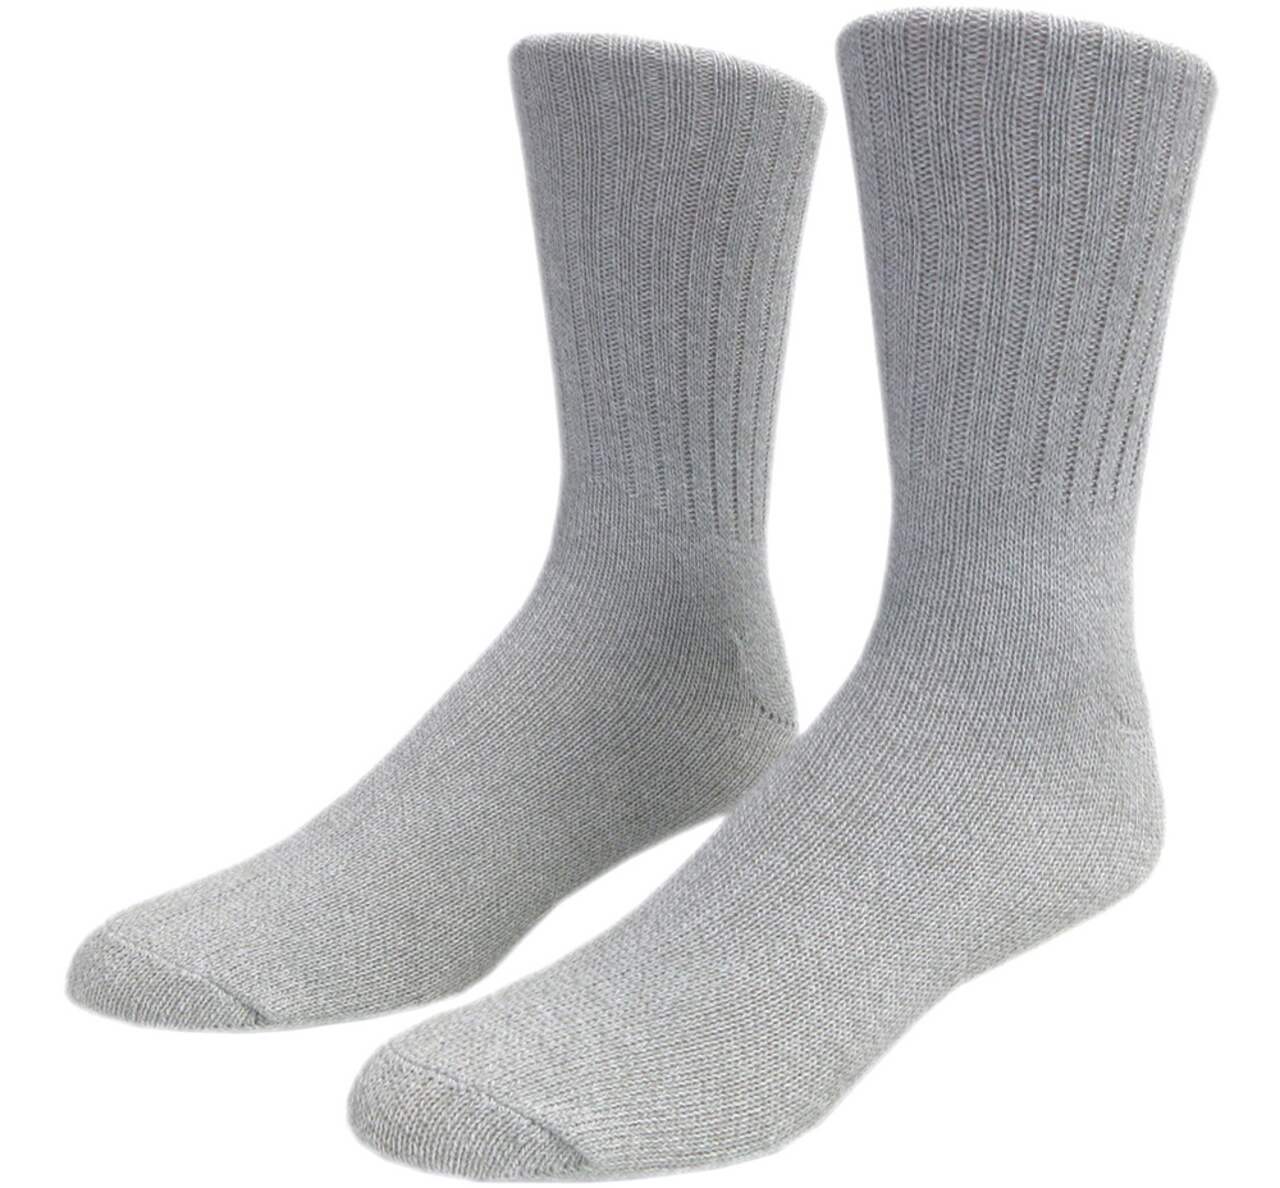 Outbound Men's Hiking Socks with Moisture-Wicking, Extra Cushioning, 2-pk,  Grey